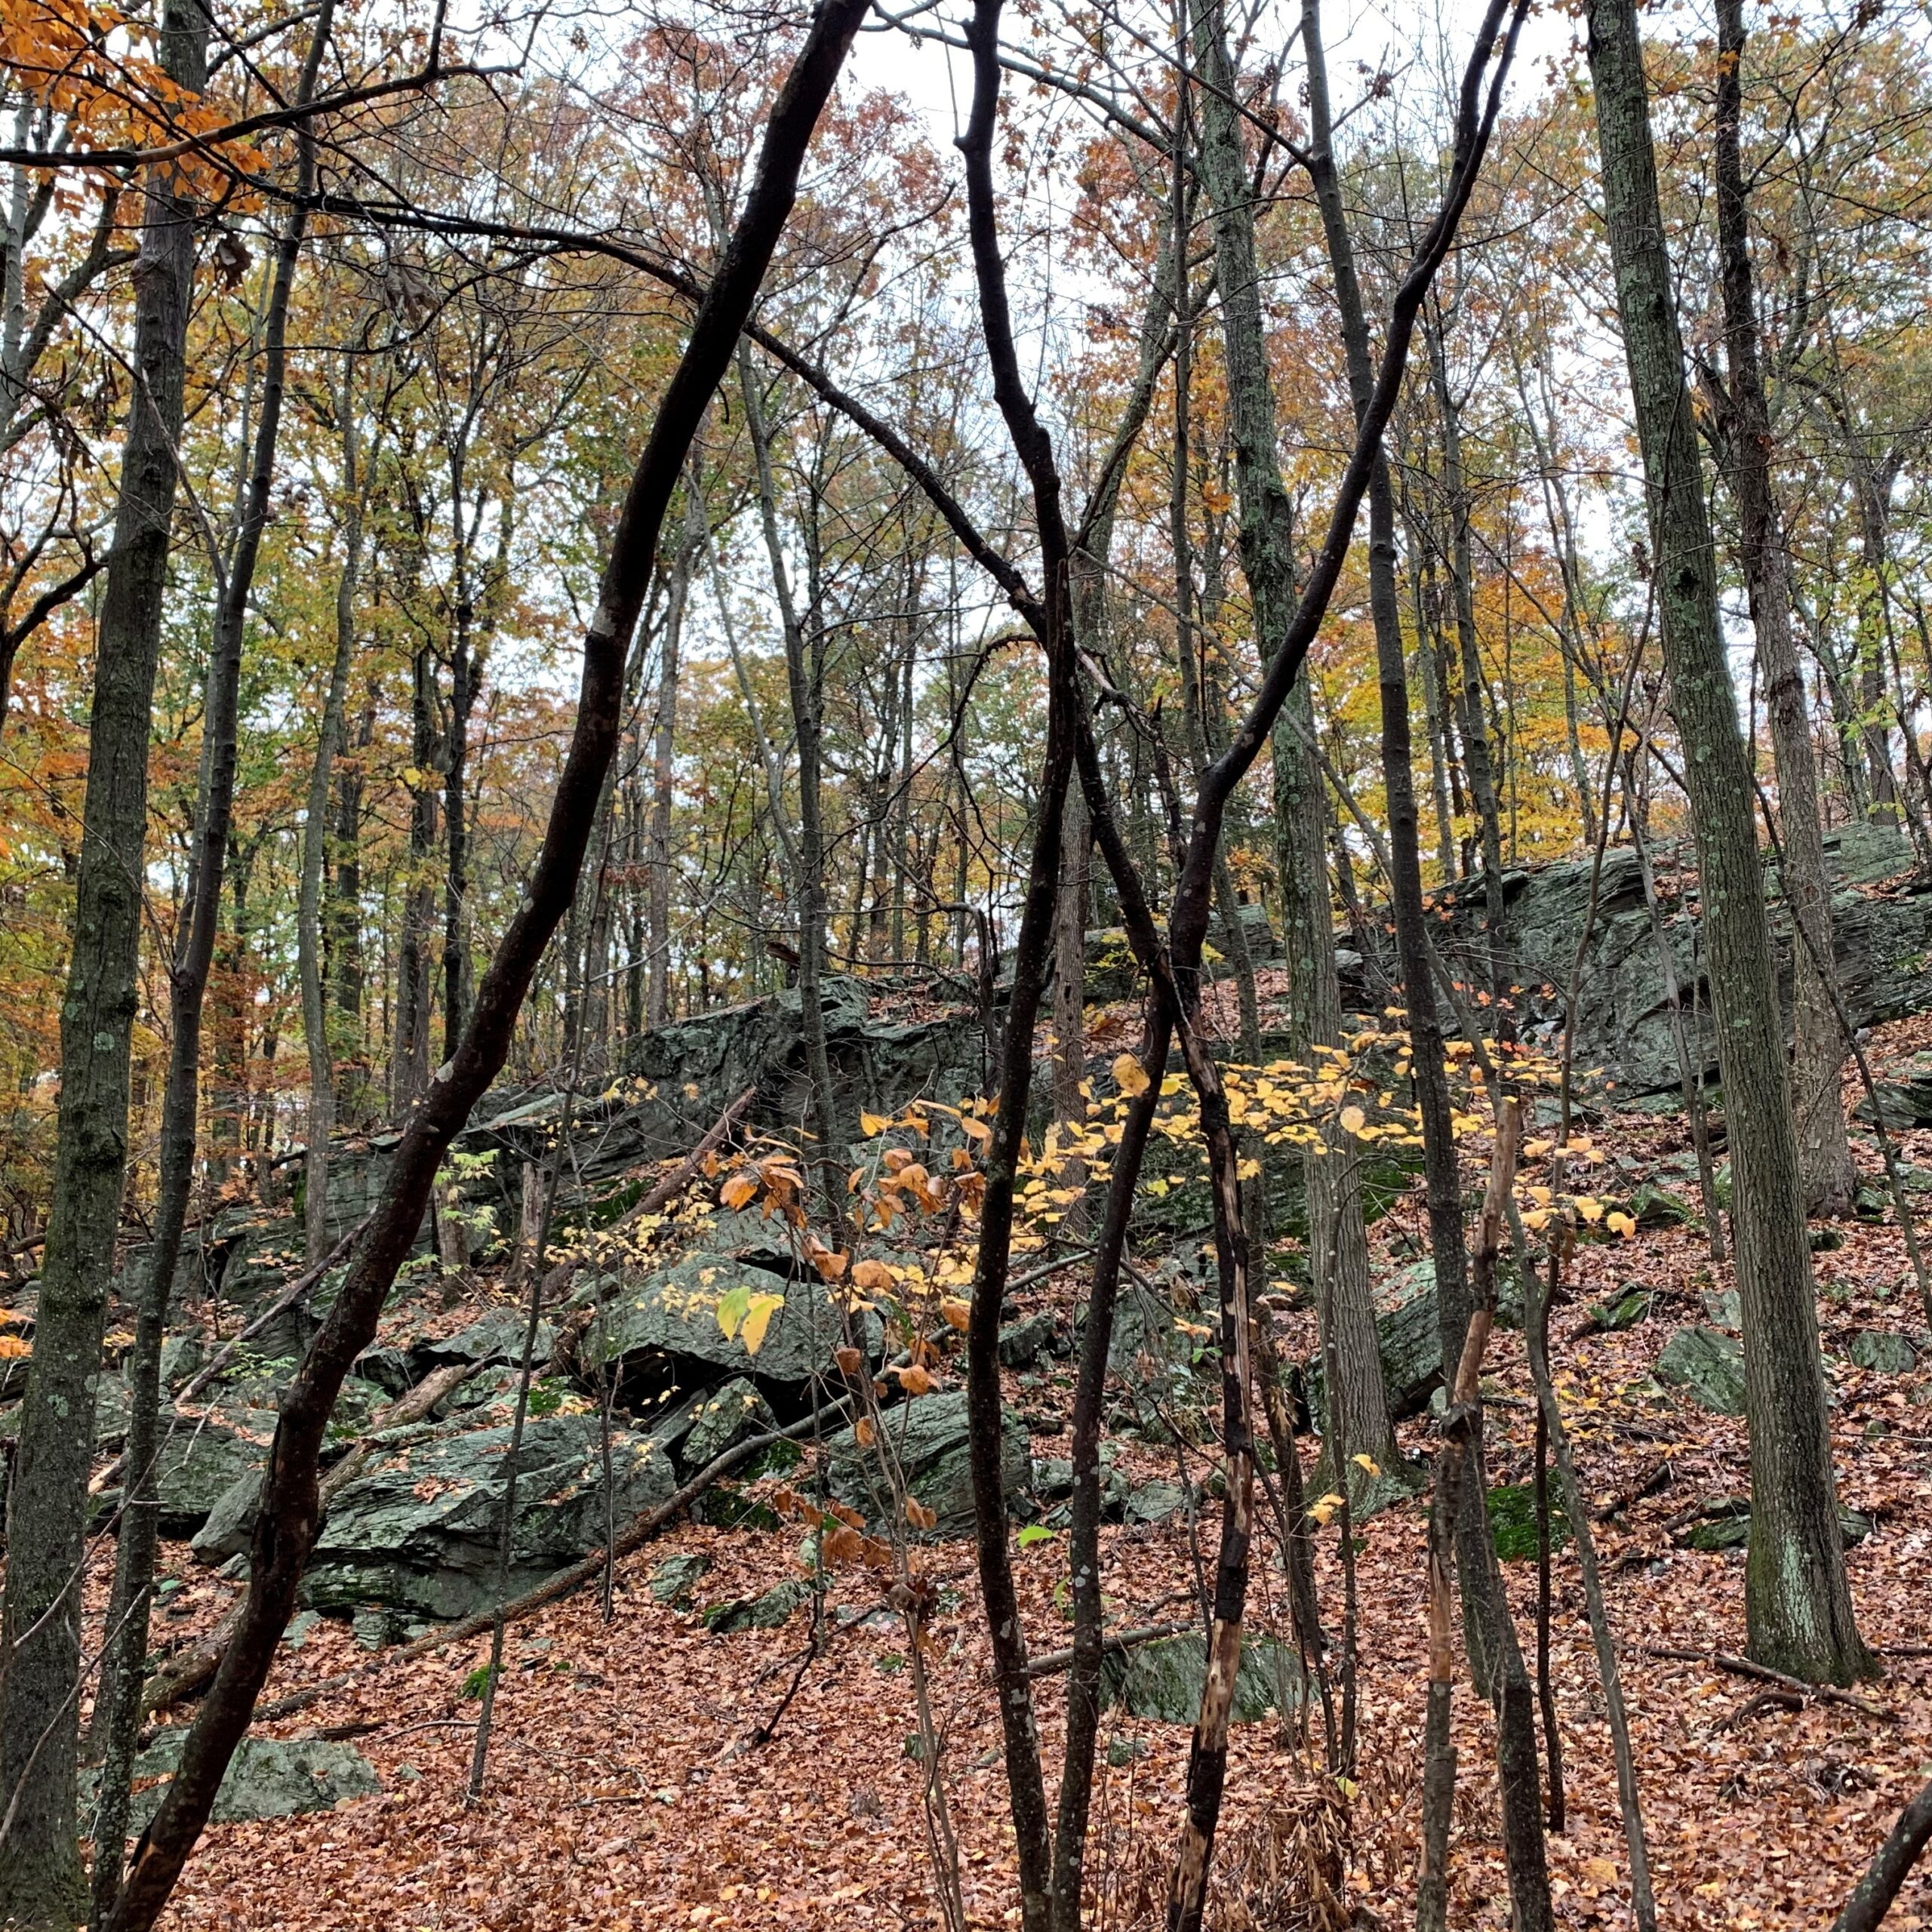 10-28-20 Site Walk - Outcropping